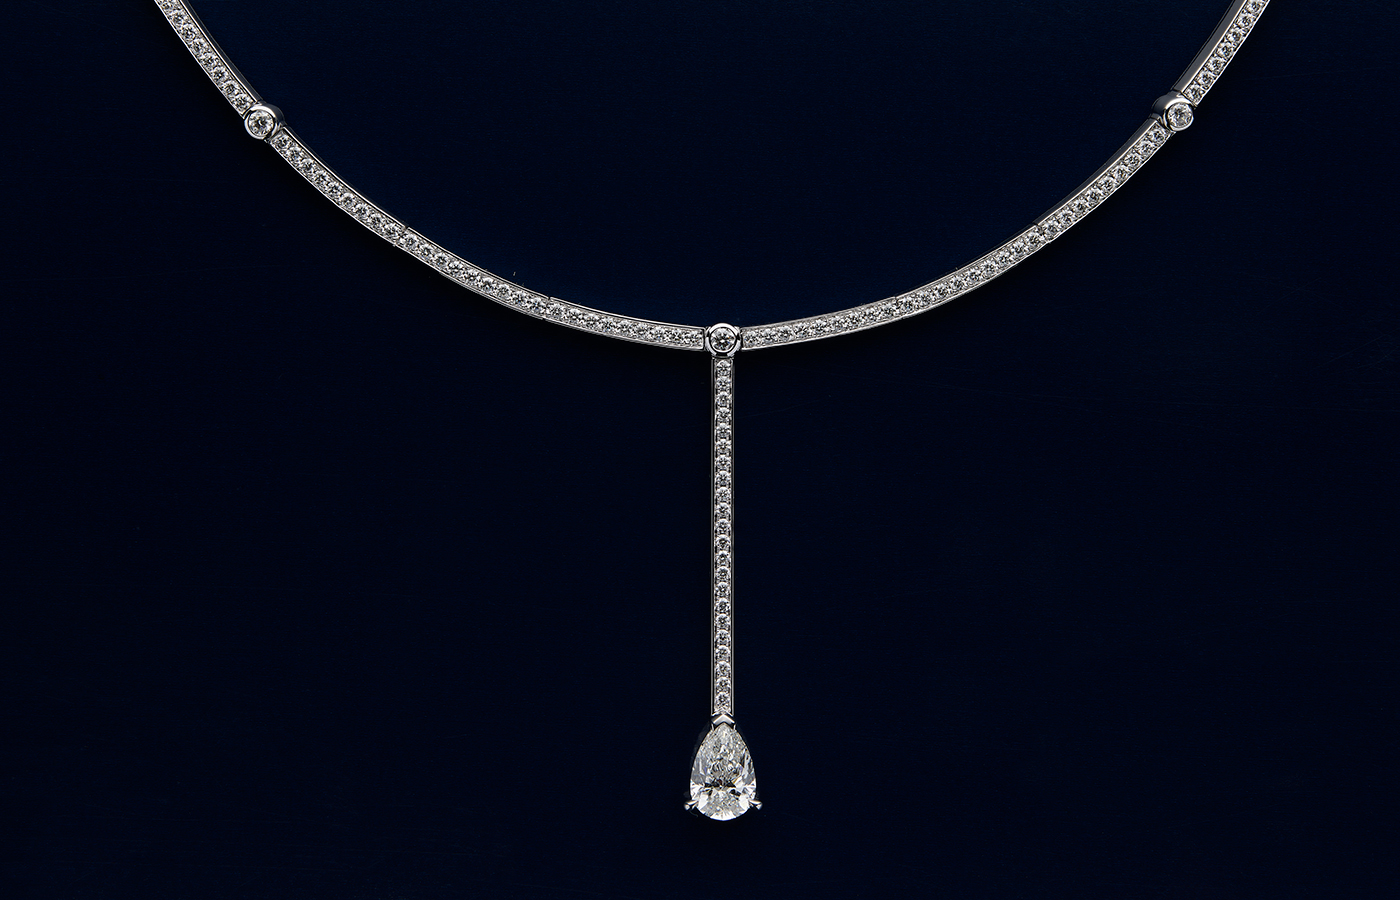 Repossi Serti Sur Vide tie necklace from the 10 Year Anniversary collection